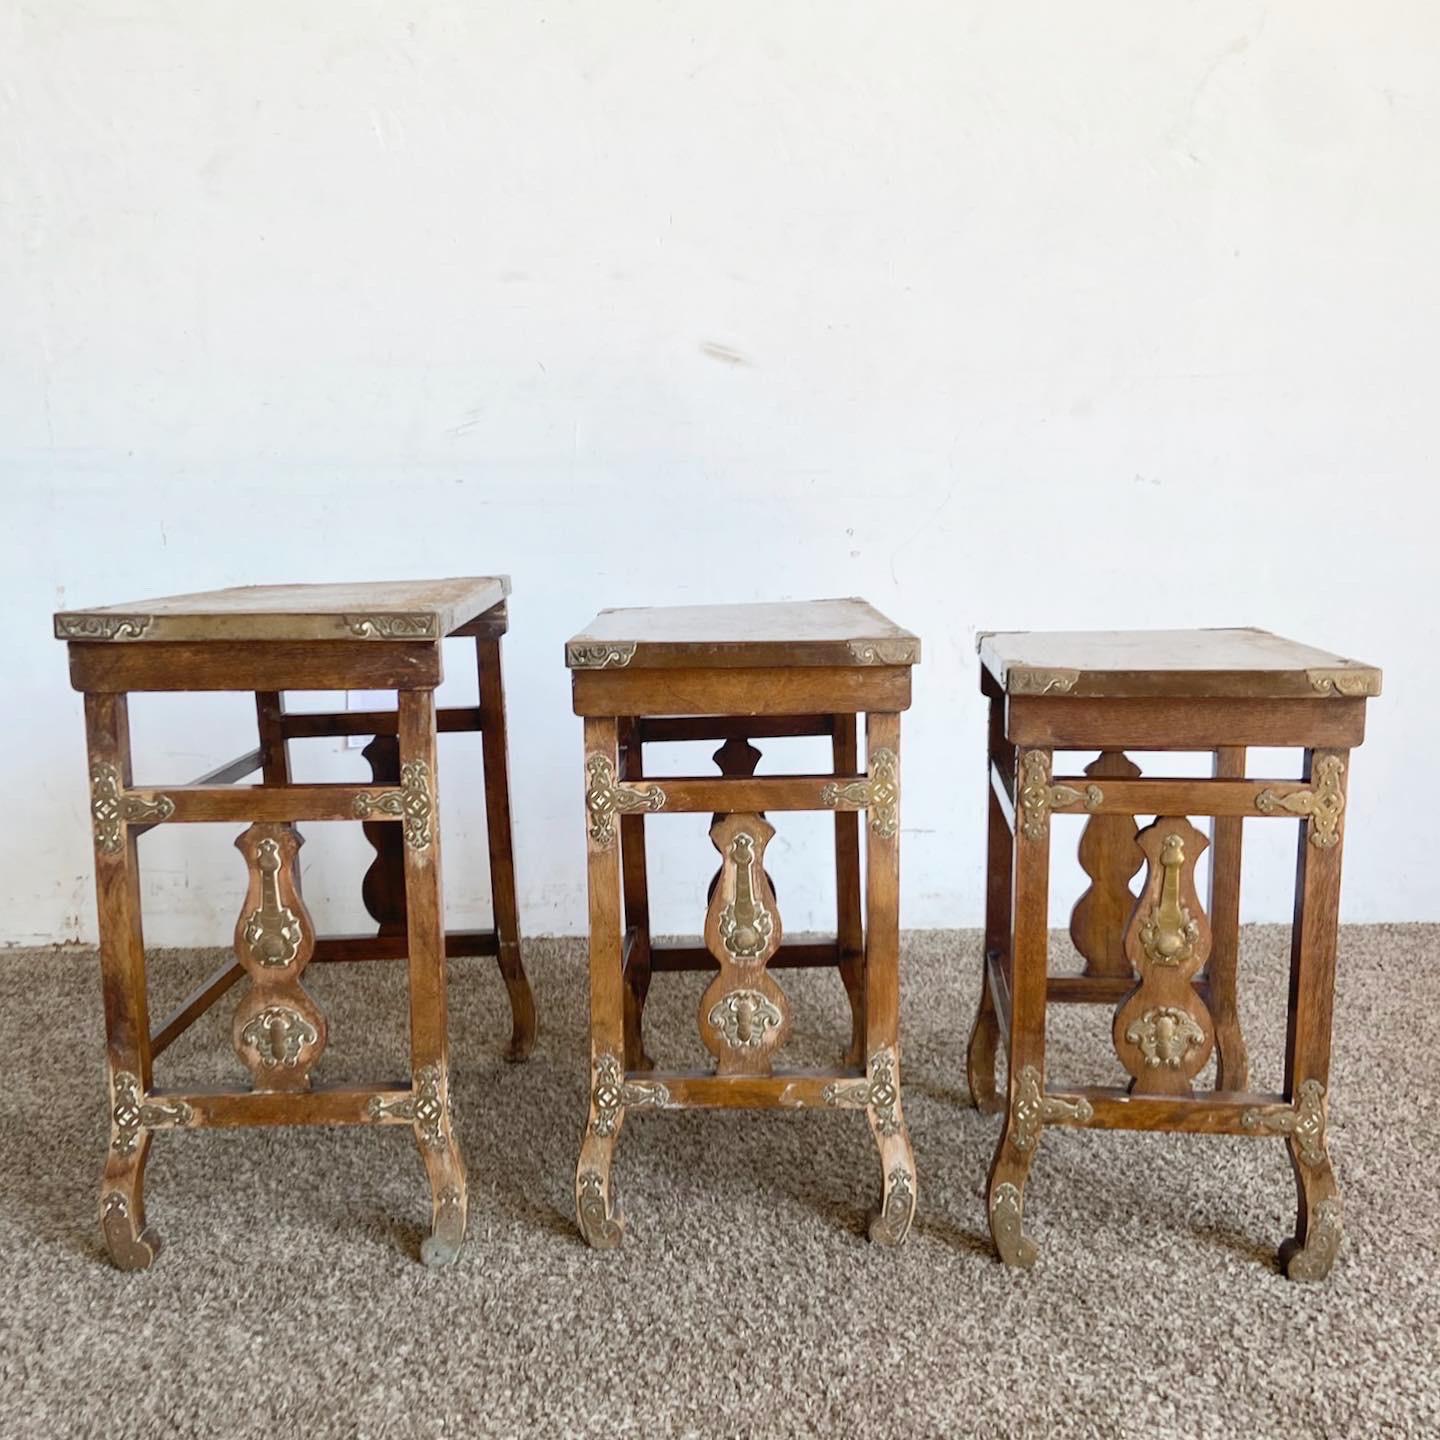 Japanese Wooden Nesting Tables With Brass Accents - Set of 3 For Sale 2